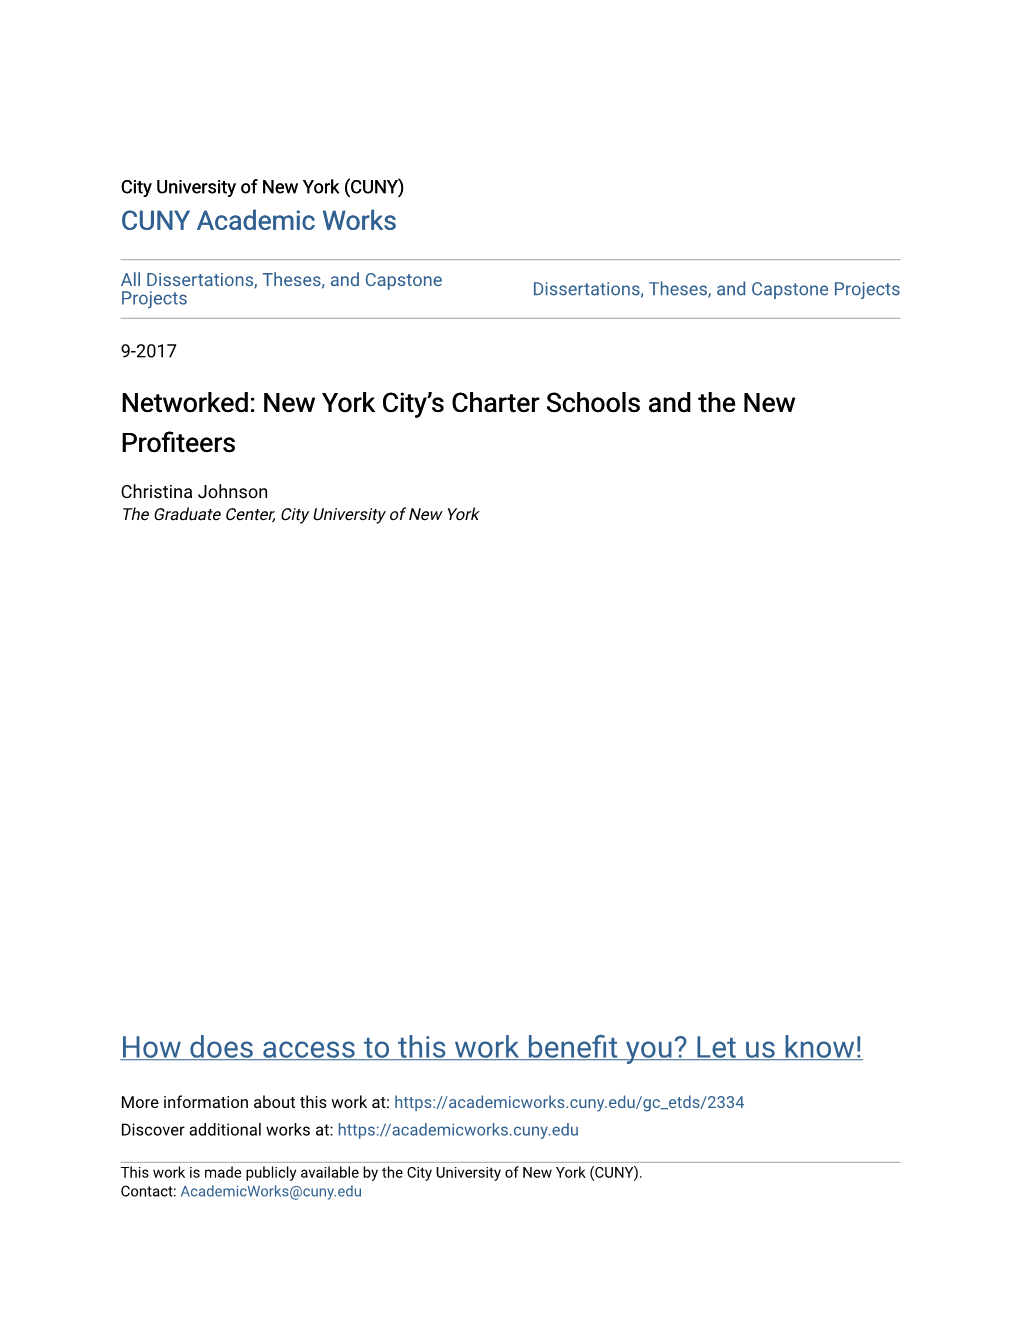 New York City's Charter Schools and the New